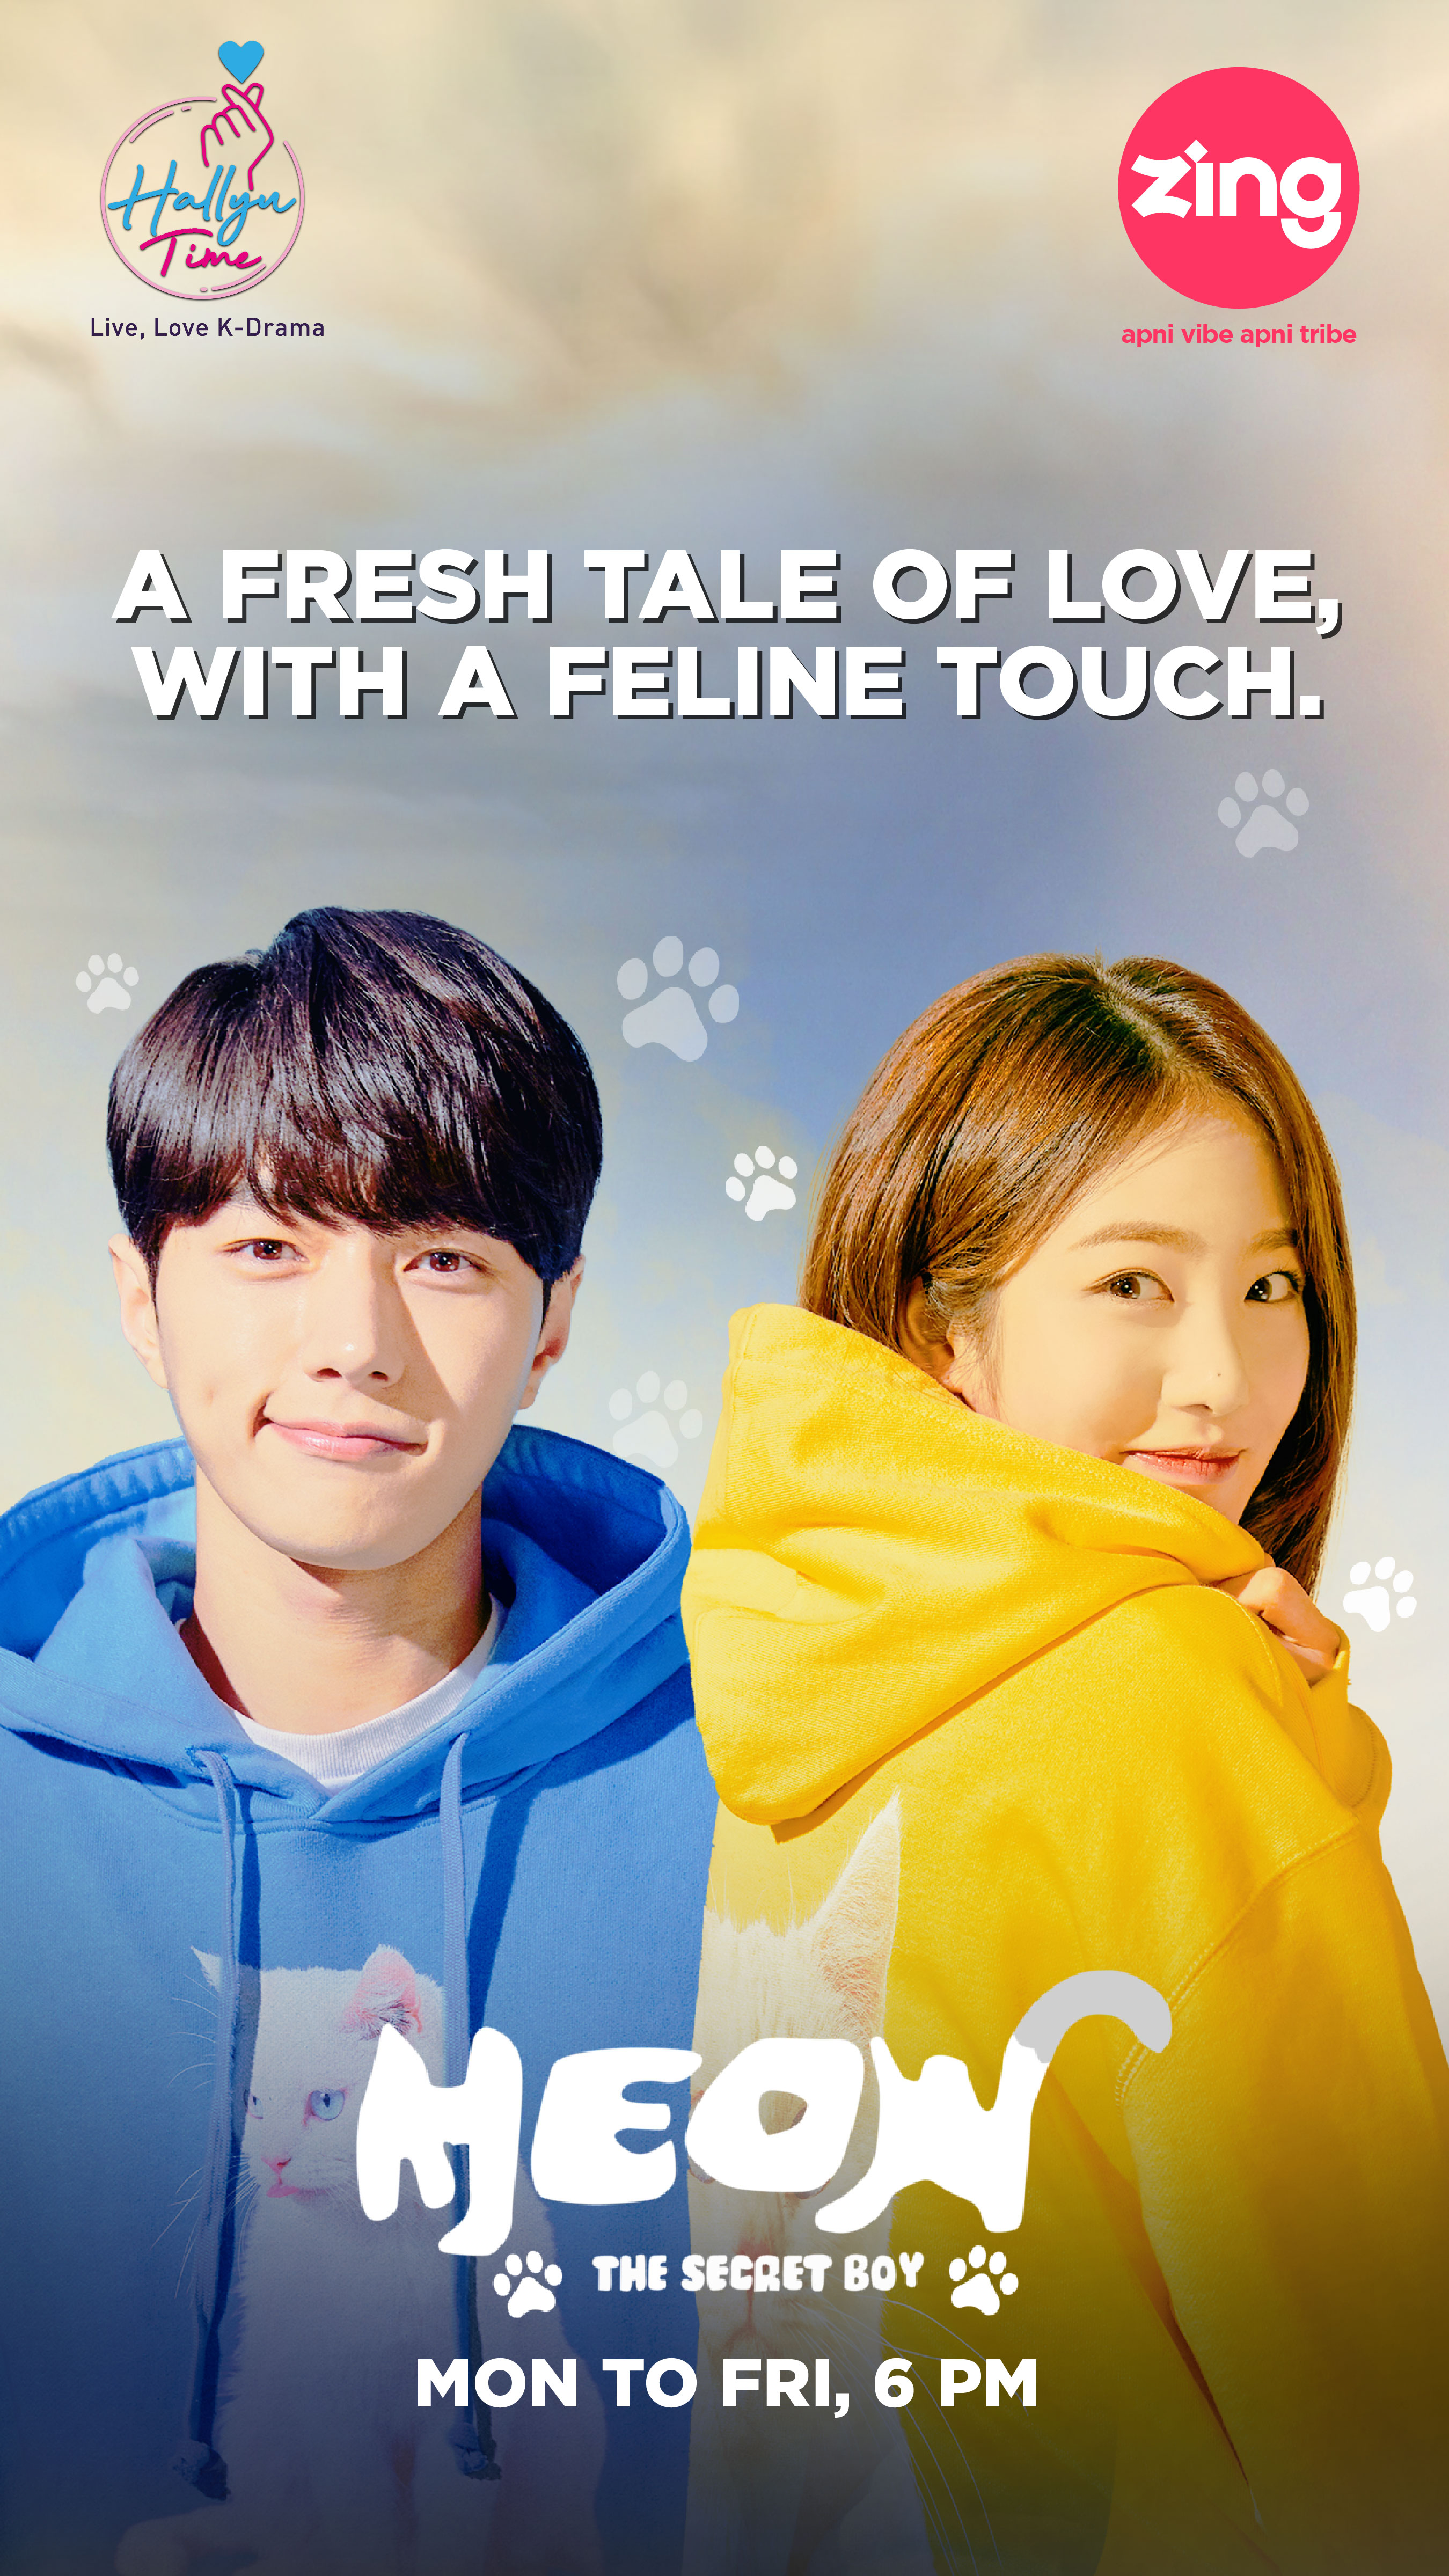 A feline-human duo will make Zing’s Hallyu slot irresistible! Watch out for the premiere of ‘Meow The Secret Boy’